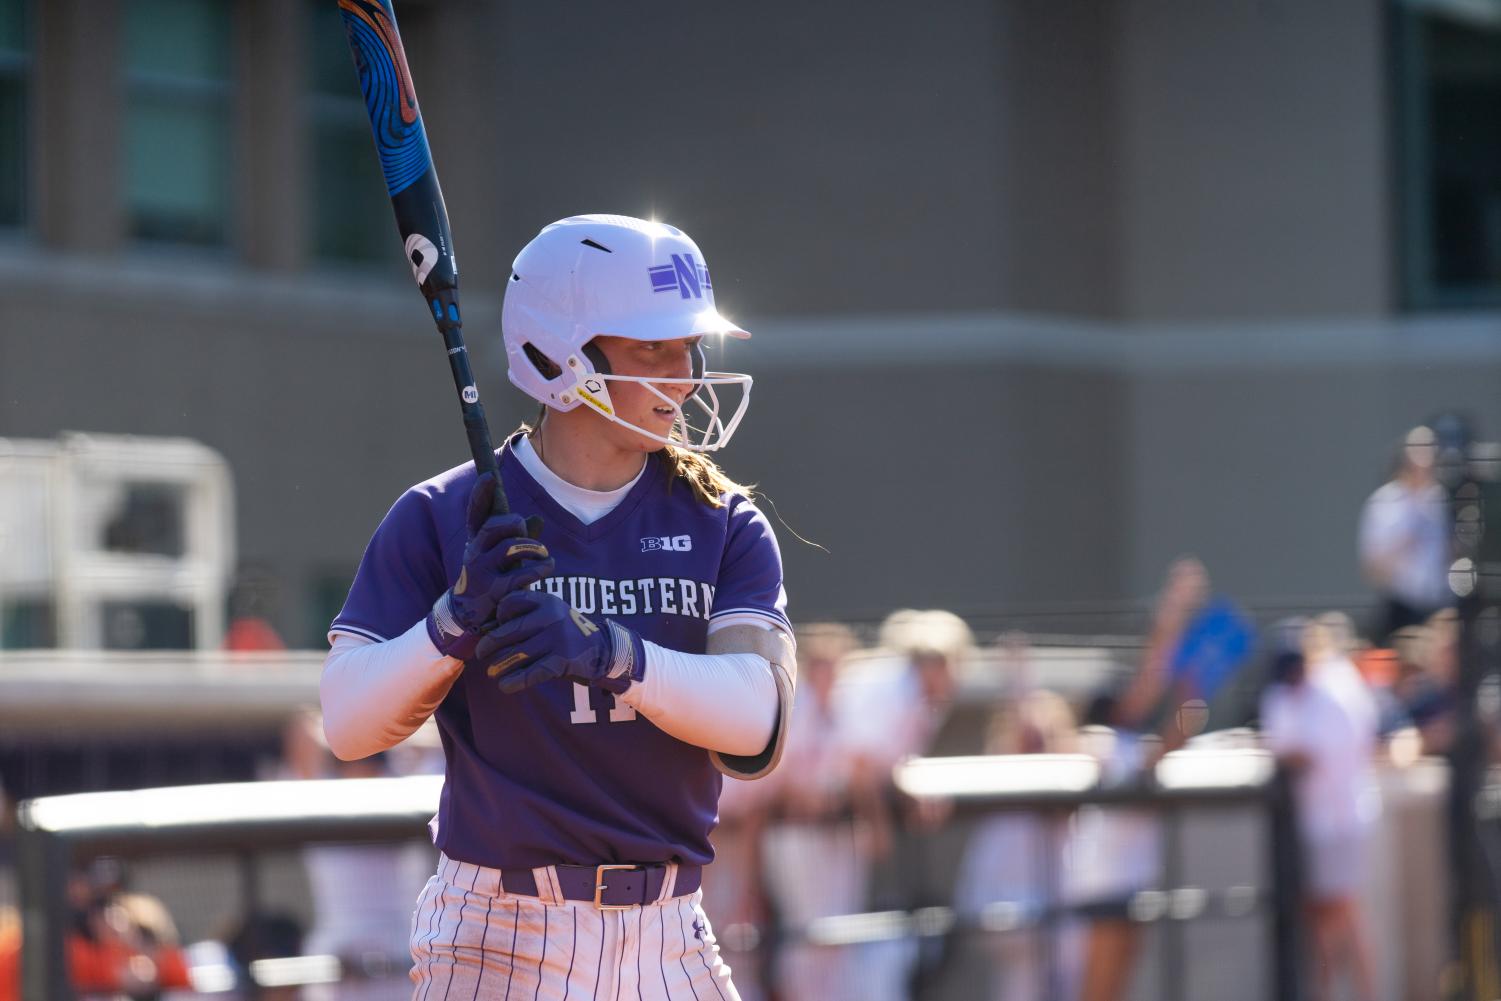 Softball+player+in+purple+uniform+and+cap+holds+a+blue-and-black+bat+on+right+shoulder.